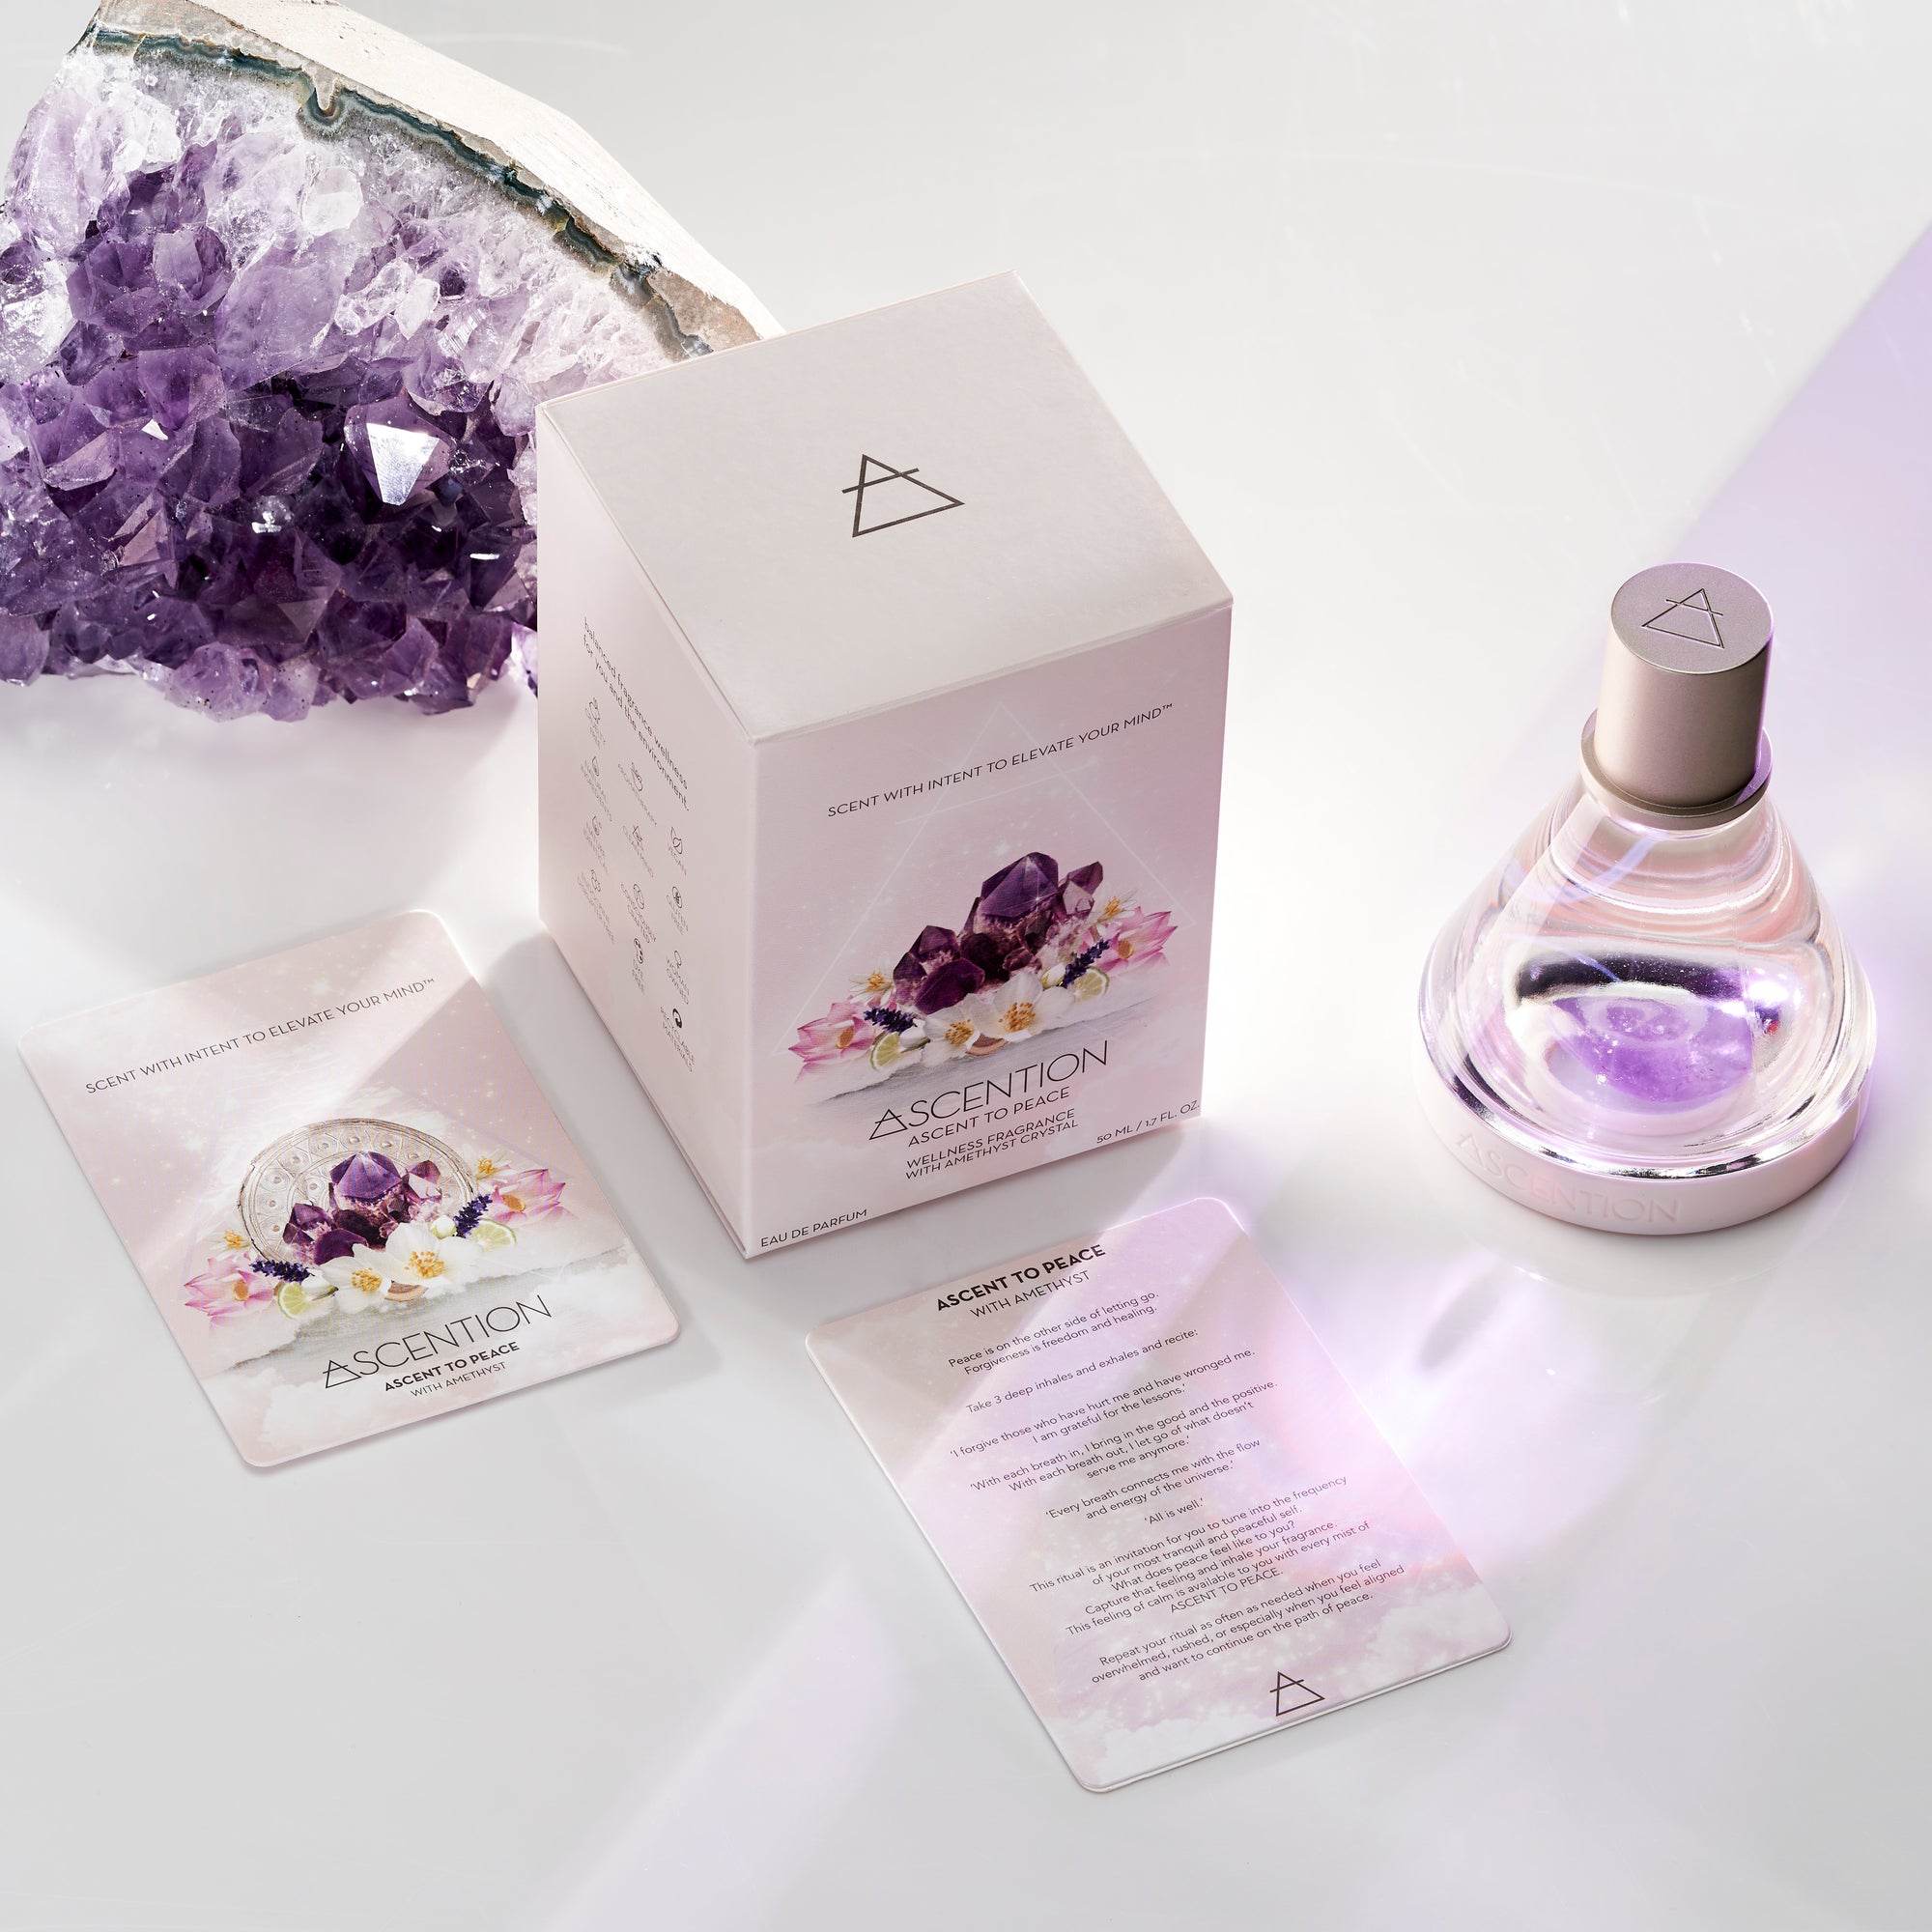 ASCENTION, ASCENT TO PEACE, SELF LOVE, SELF CARE, GRETA FITZ, FEMALE FOUNDER, AROMACOLOGY, AROMATHERAPY, AMETHYST, SCENT WITH INTENT, CLEAN FRAGRANCE, CLEAN, CLEAN BEAUTY, VEGAN FRAGRANCE, RITUAL, WITCHCRAFT, ASCENSION, ROSE QUARTZ, CITRINE, SMOKY QUARTZ,